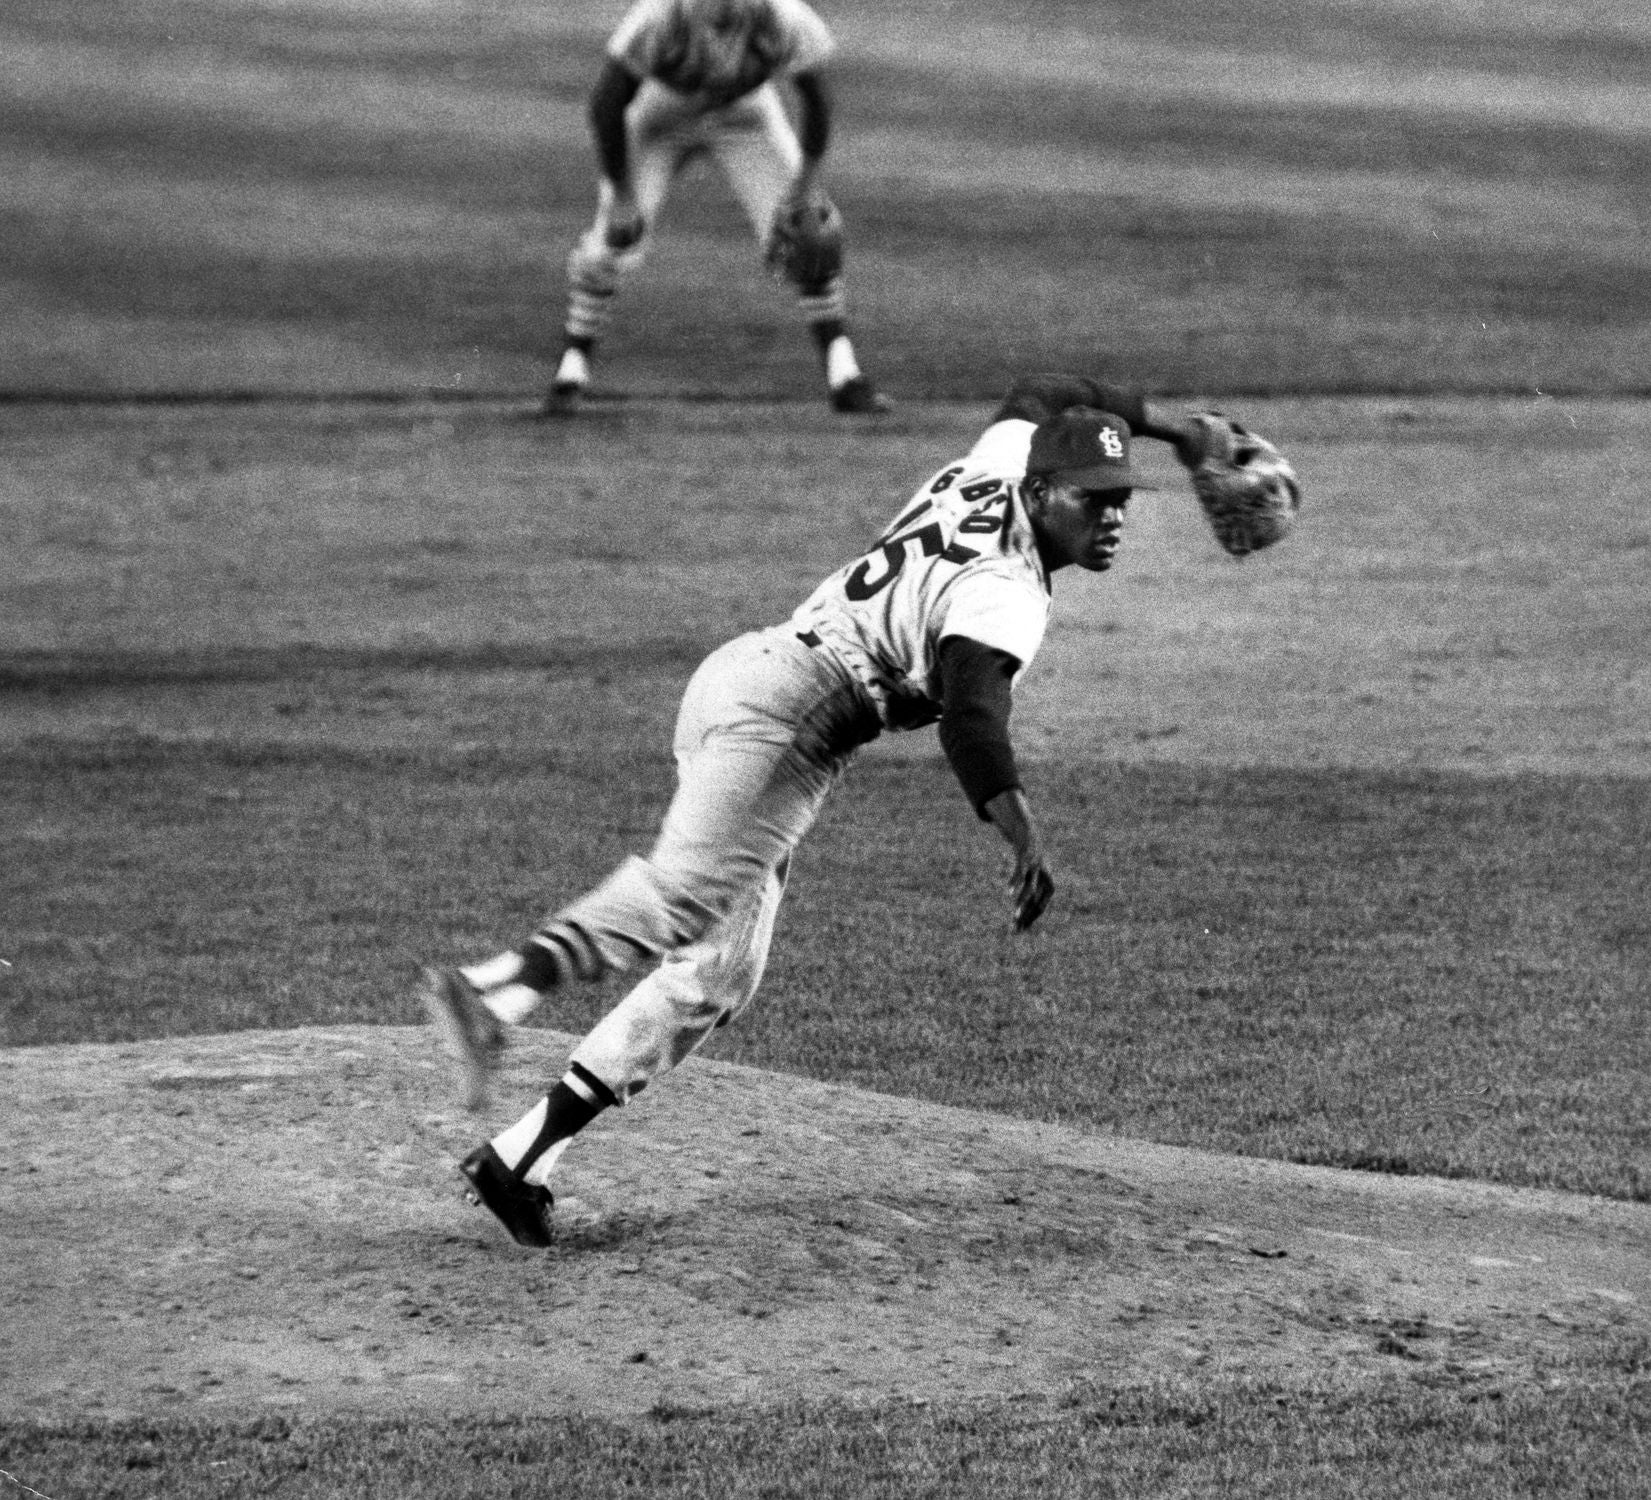 Bob Gibson wills Cardinals to Game 7 victory in 1964 World Series | Baseball Hall of Fame